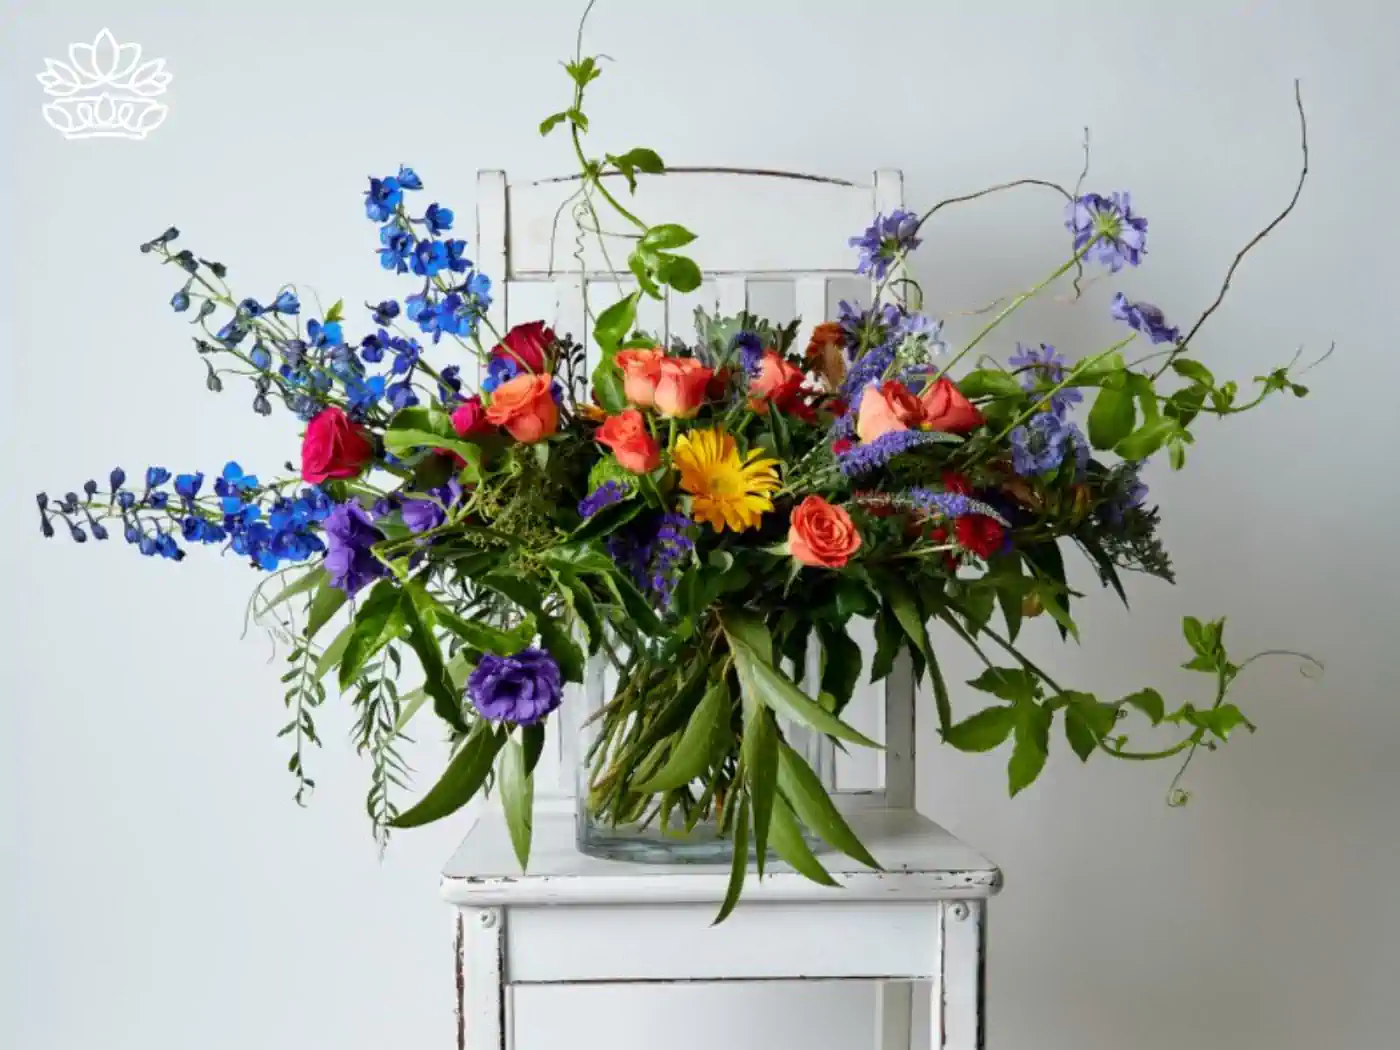 Lush and colorful front desk floral reception desk arrangement in a rustic glass vase, featuring an array of blue delphiniums, vibrant red and orange roses, and wild greenery on a vintage white chair.